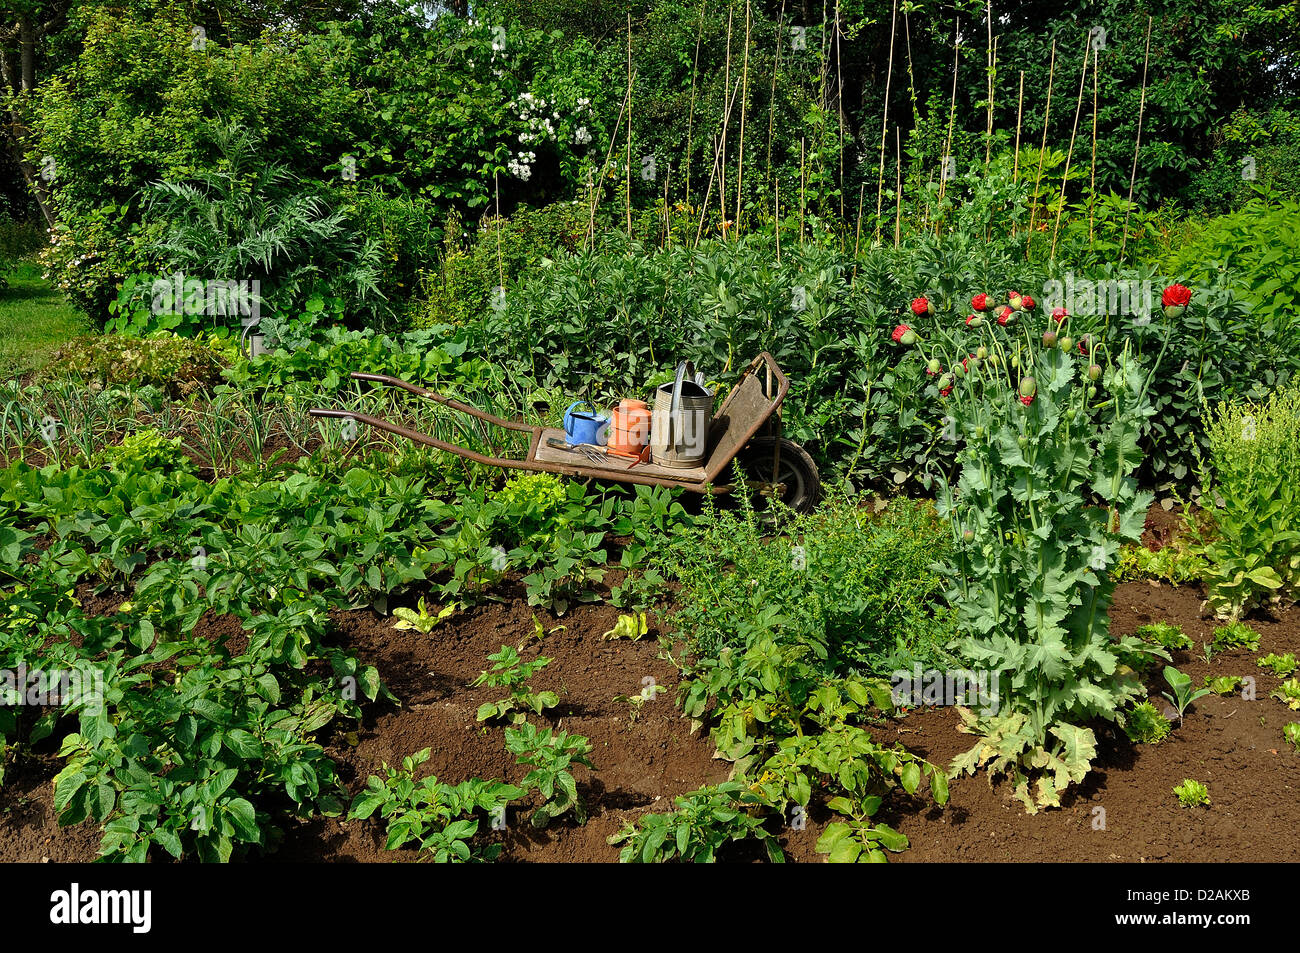 Vegetable Garden With A Shrub Hedge In The Background Mixed Beds Of Stock Photo Alamy